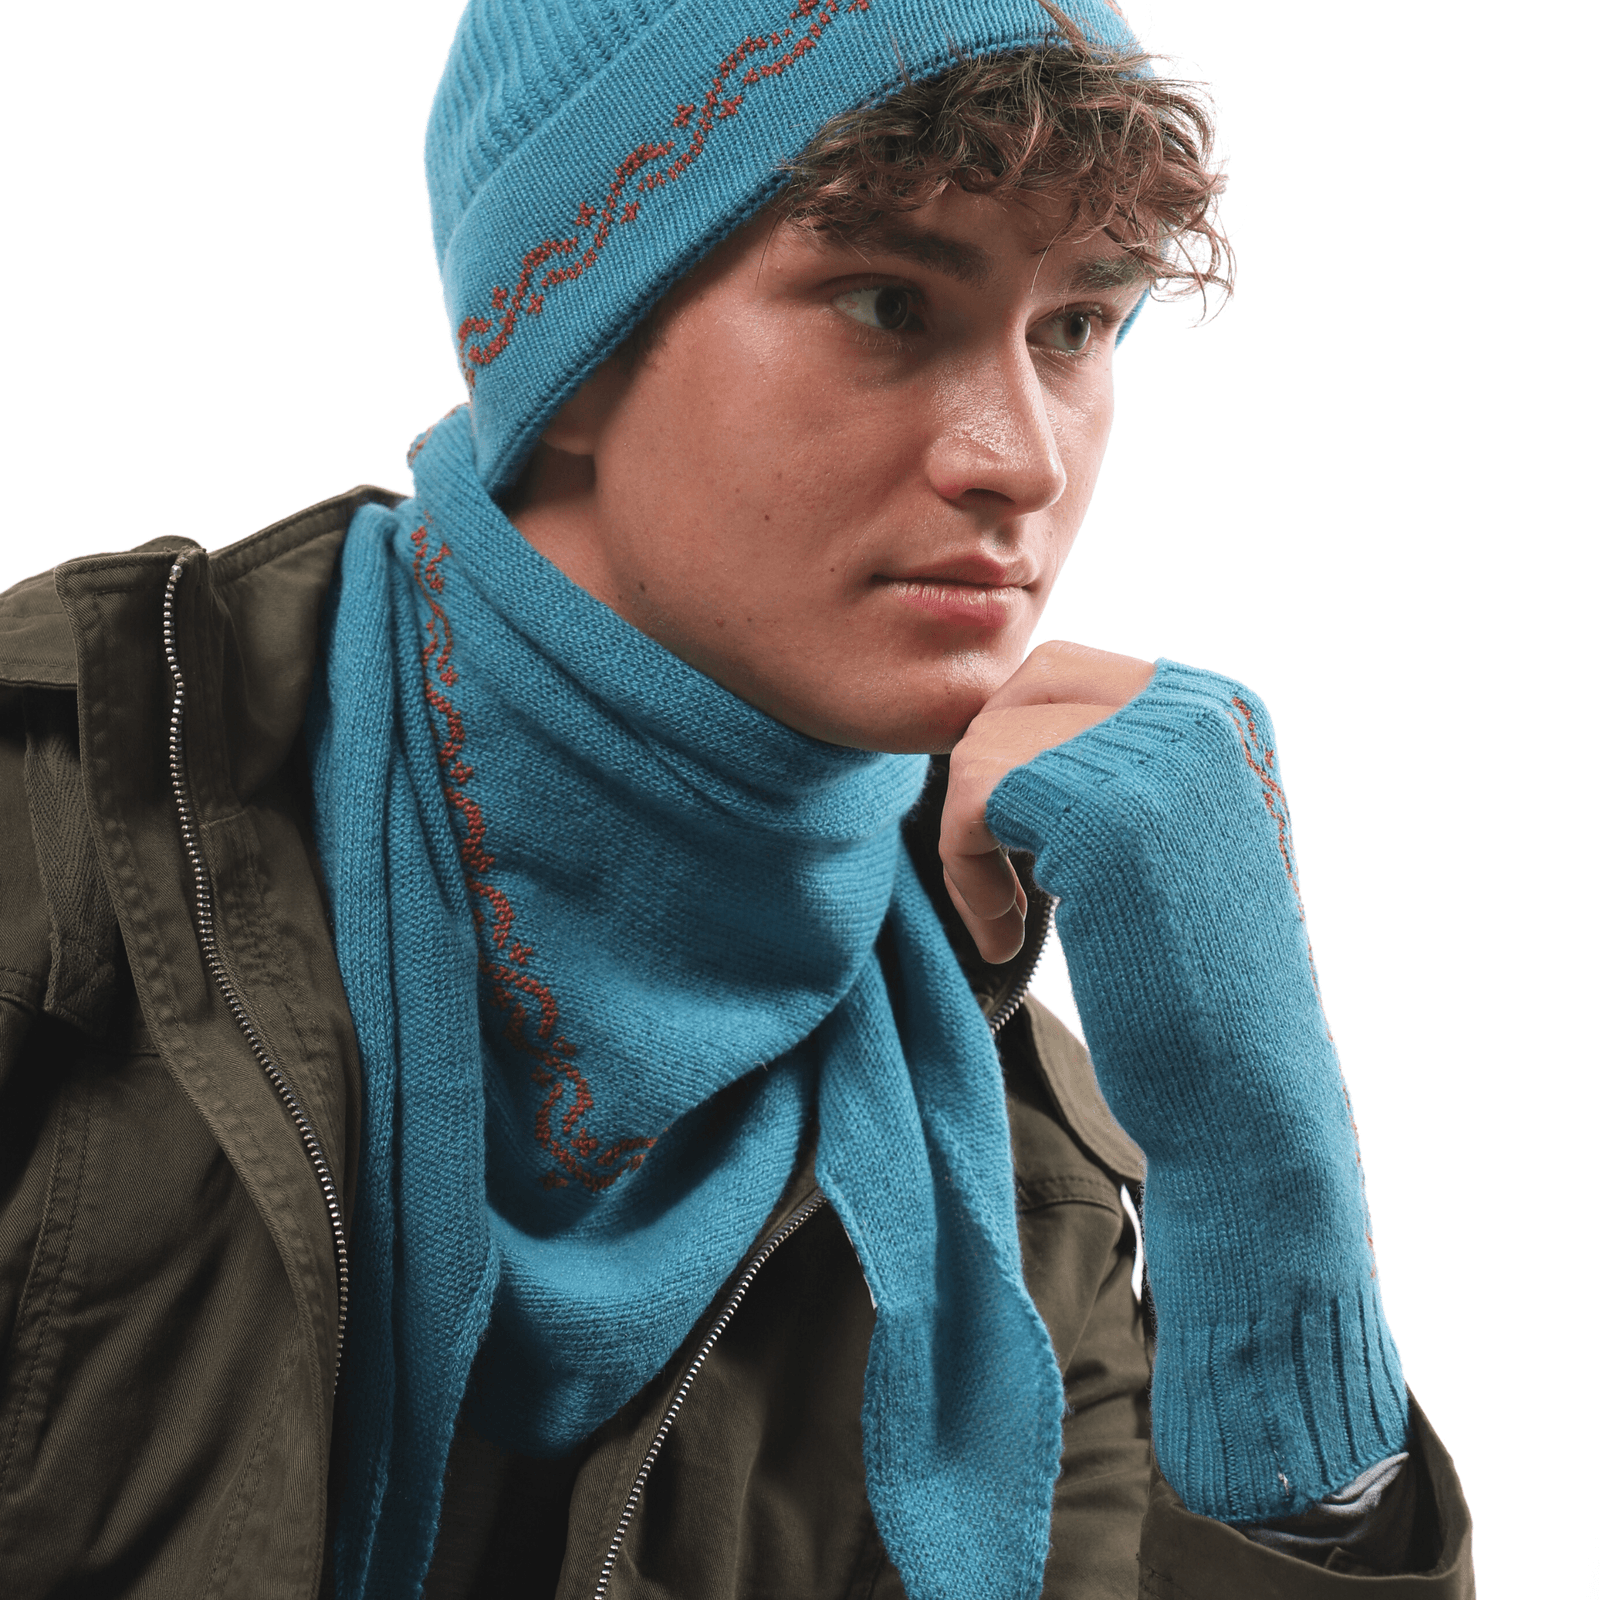 TEAL CASHMERE TRIANGLE SCARF | WAVES